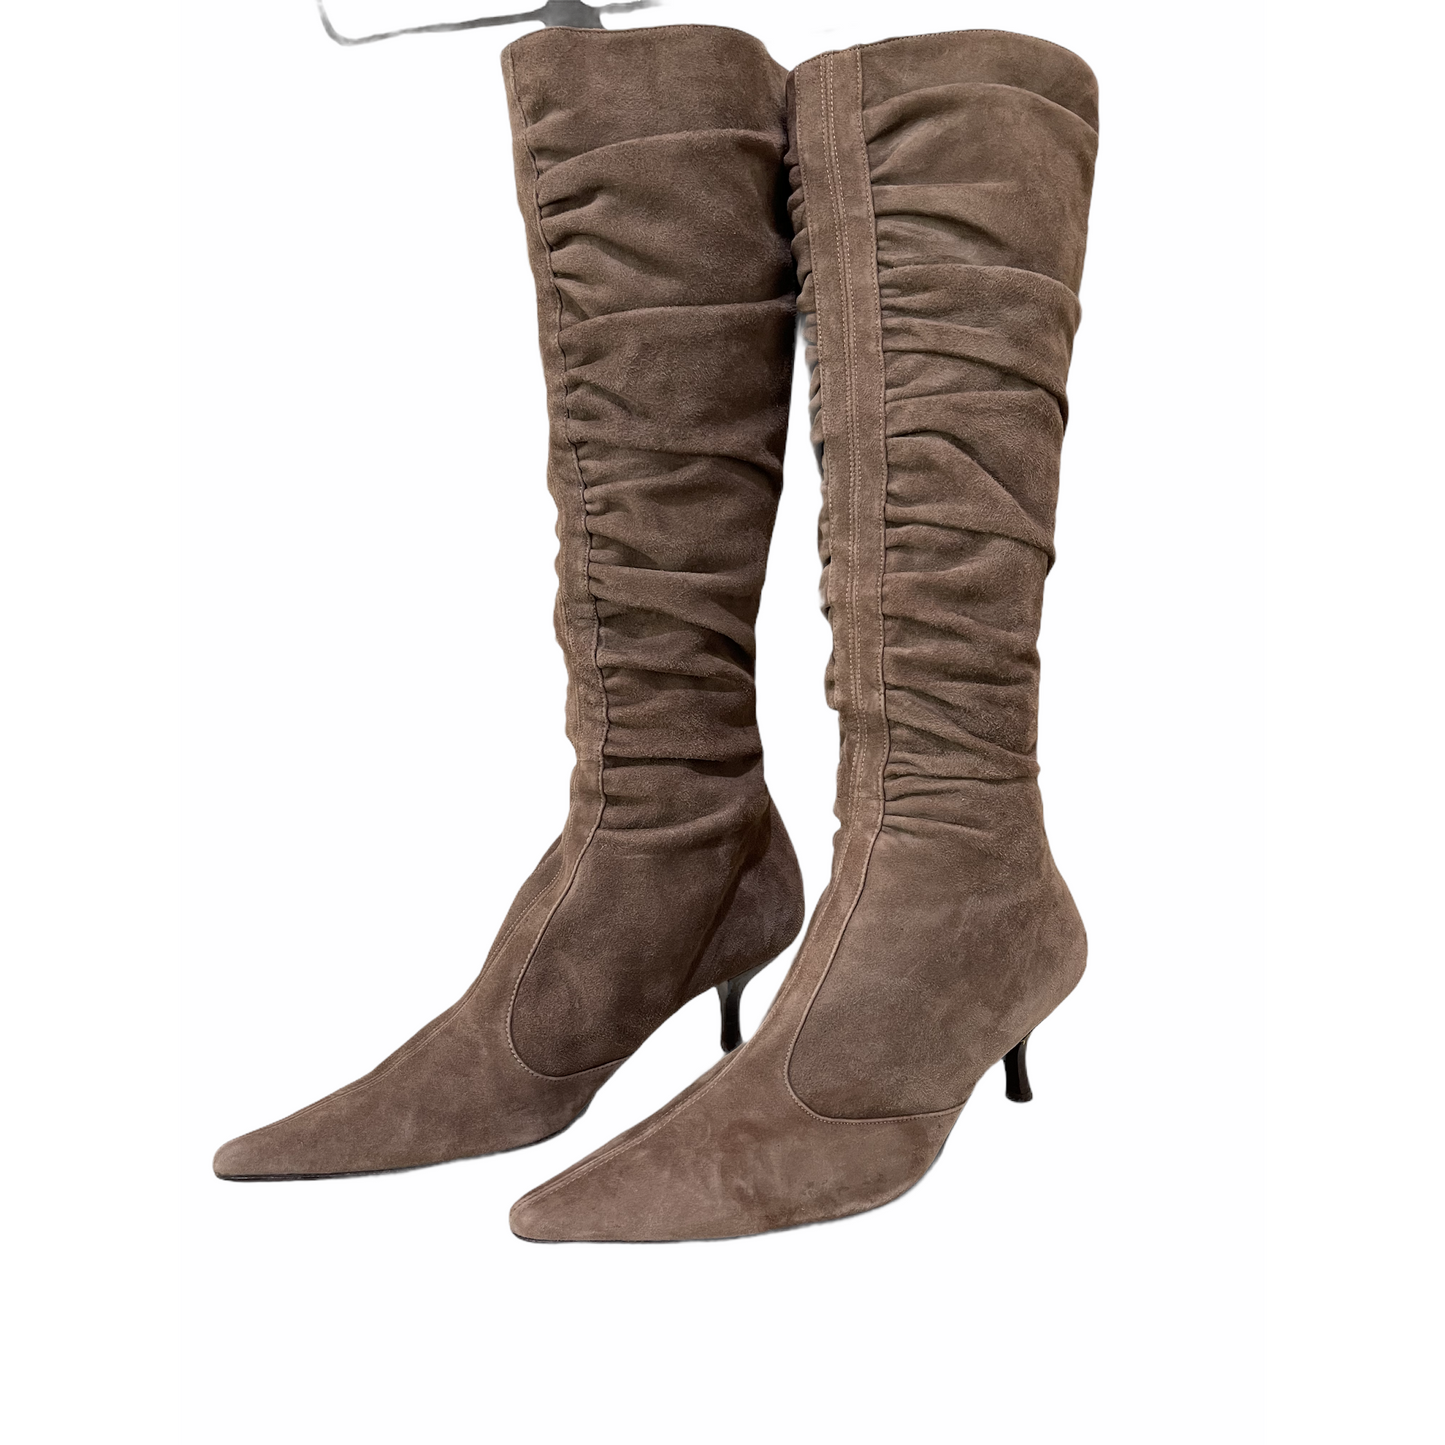 Heeled Boots-Light Brown Suede By Jigsaw